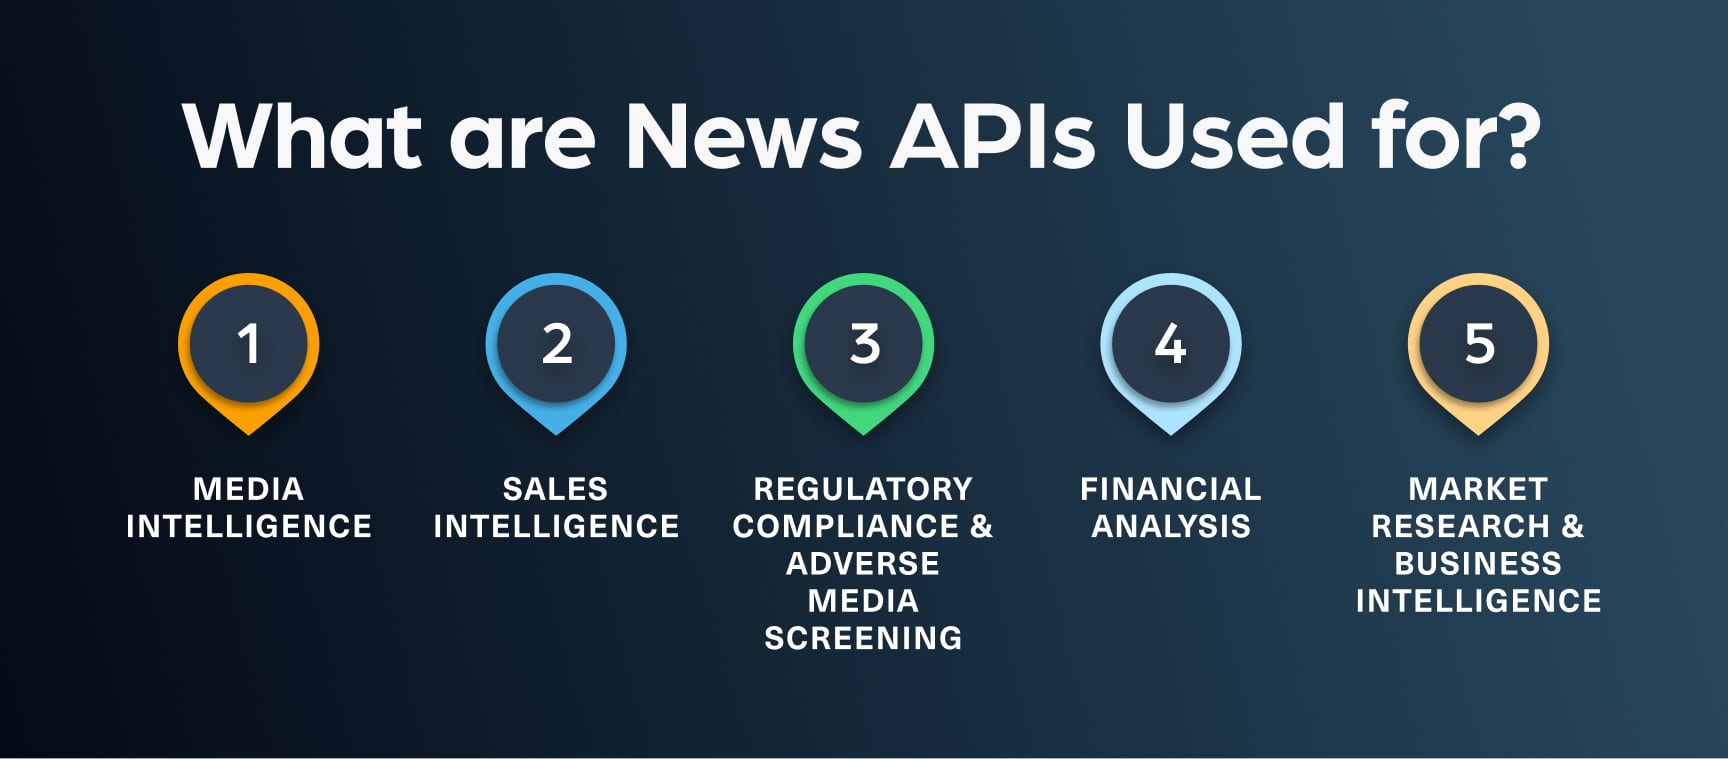 What are News APIs used for?